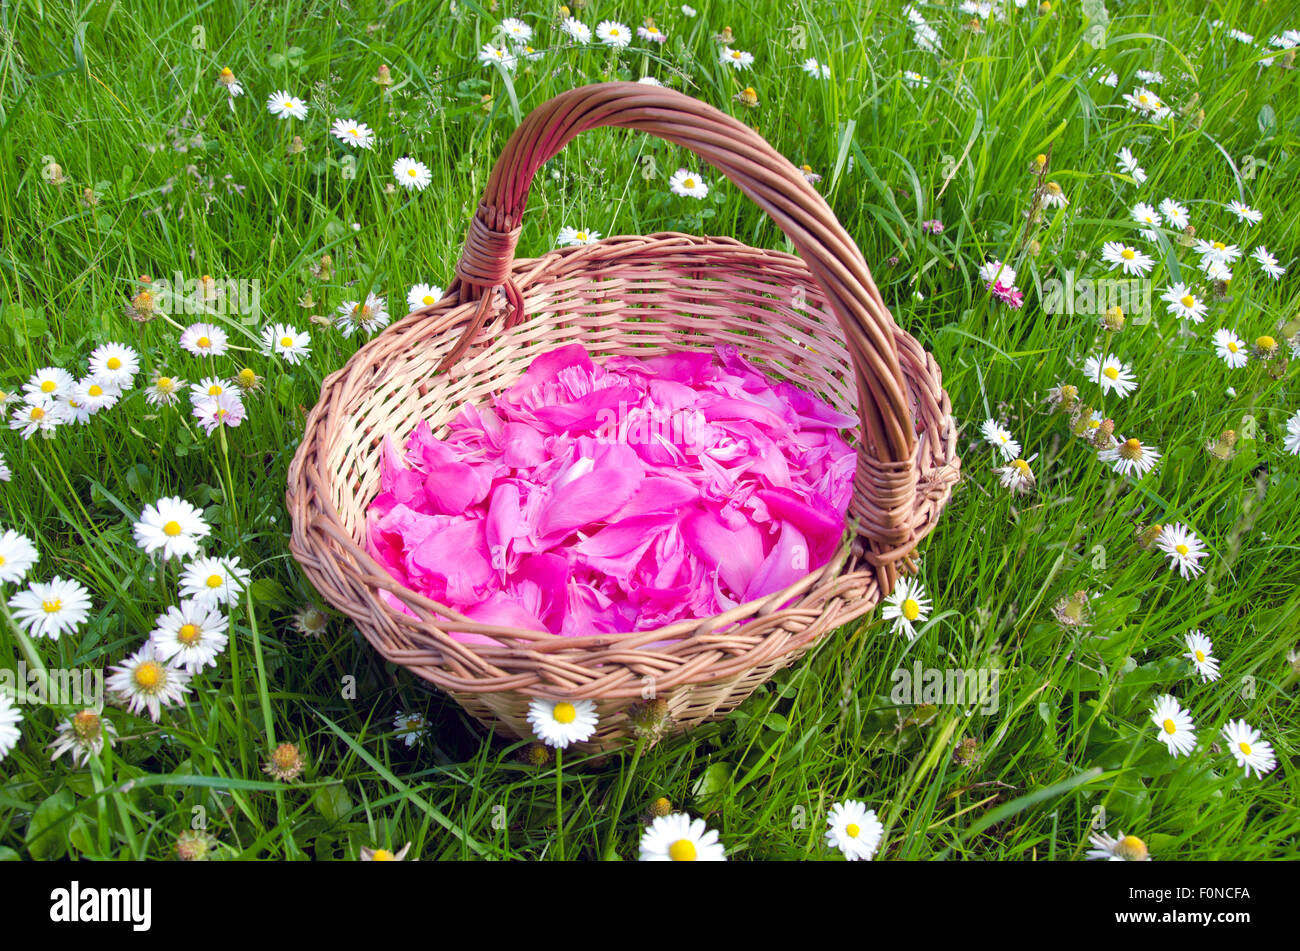 pink European peony petals in the woven wooden basket on grass Stock Photo